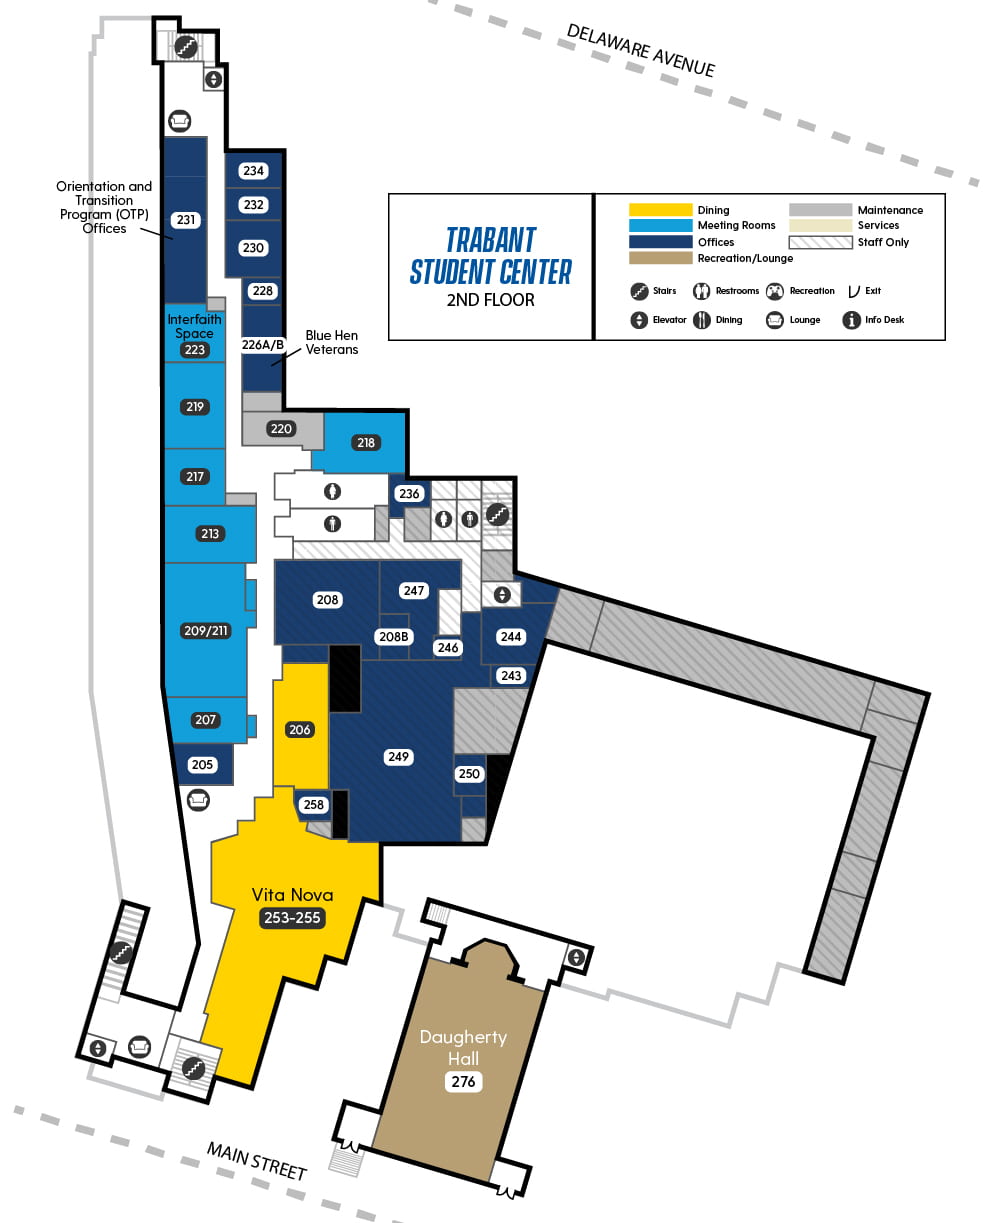 Map of Trabant Second Floor showing Vita Nova, Interfaith Space, Orientation & Transition Program Offices, and several reservable meeting spaces